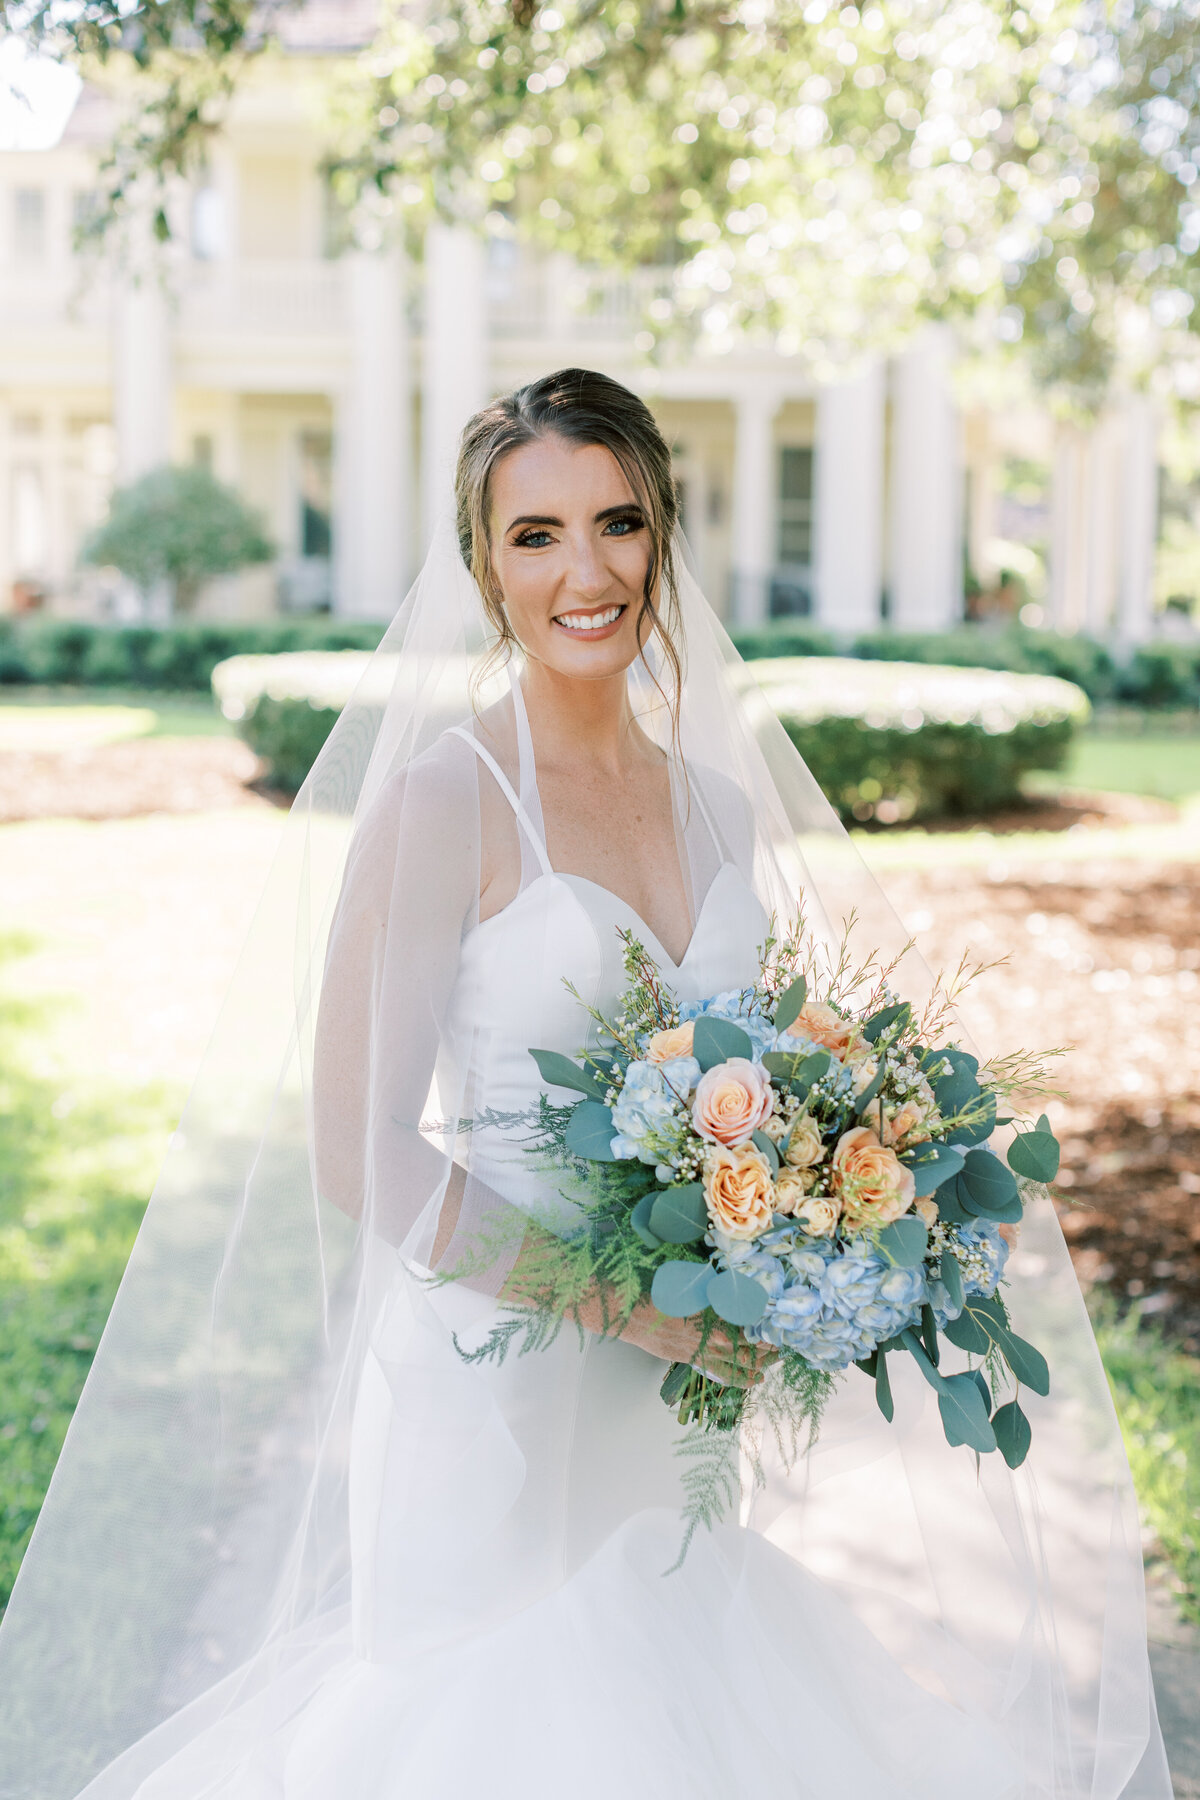 A bride holds her peach and blue bouquet while smiling at the camera.